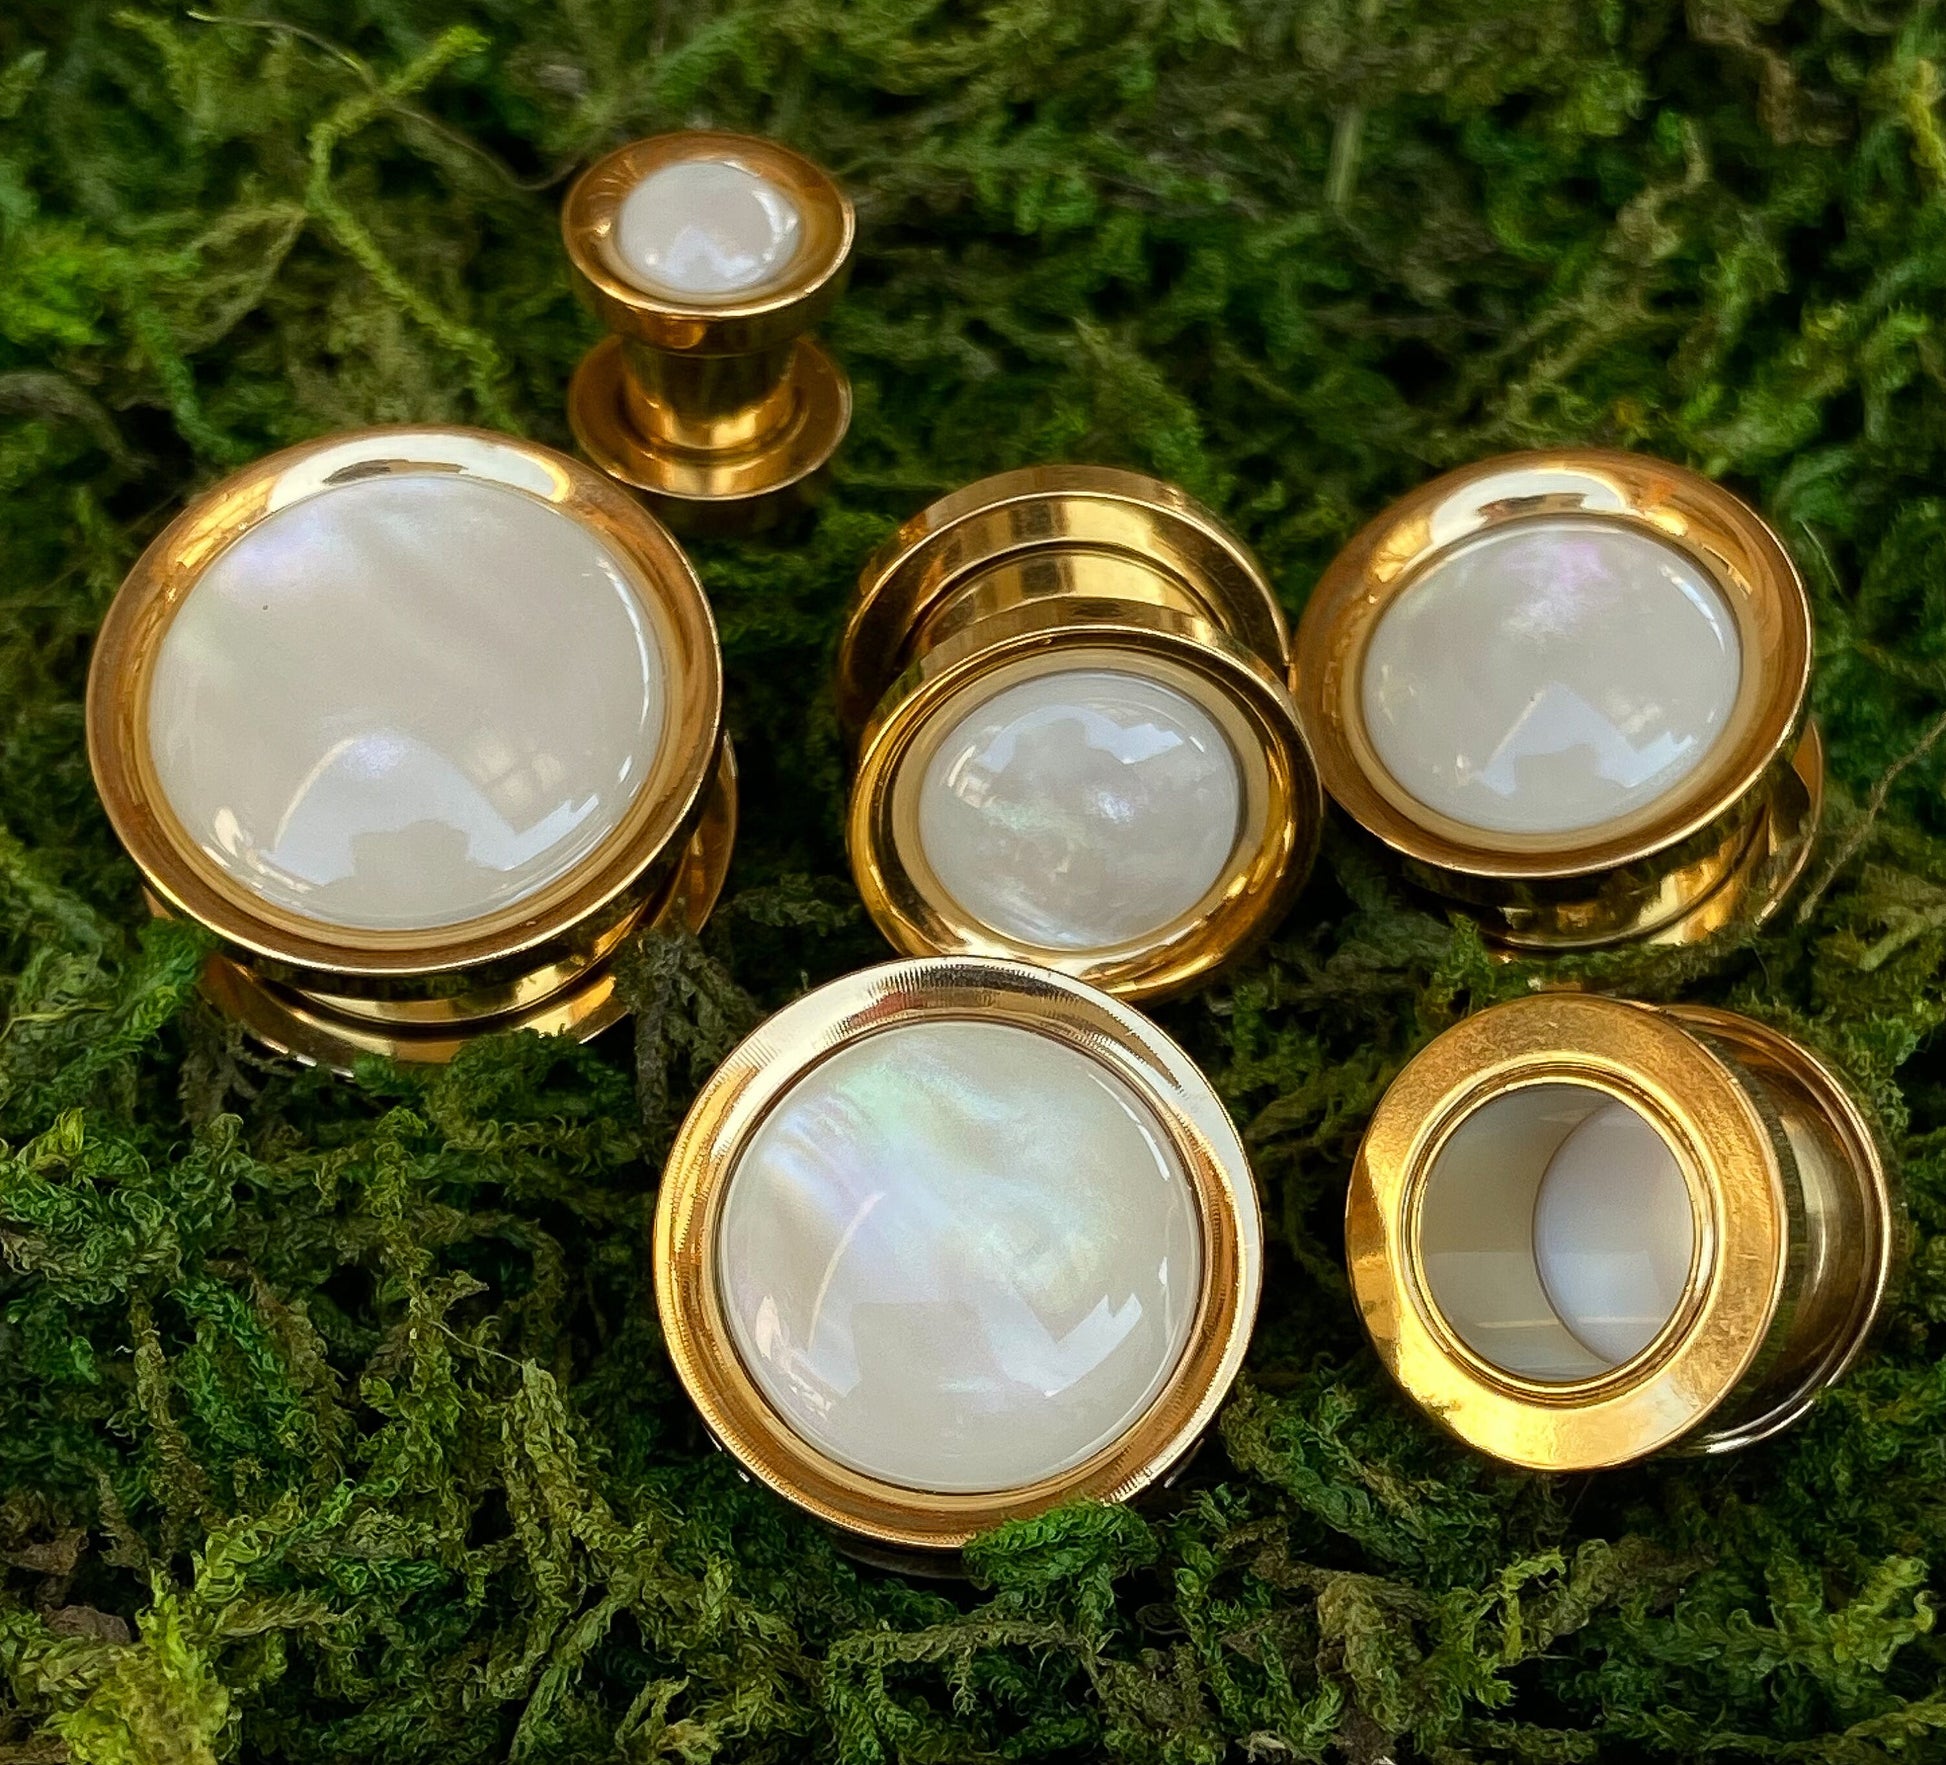 PAIR of Stunning Synthetic White Pearl Gold Screw Fit Tunnels/Plugs - Gauges 2g (6mm) thru 5/8" (16mm) available!